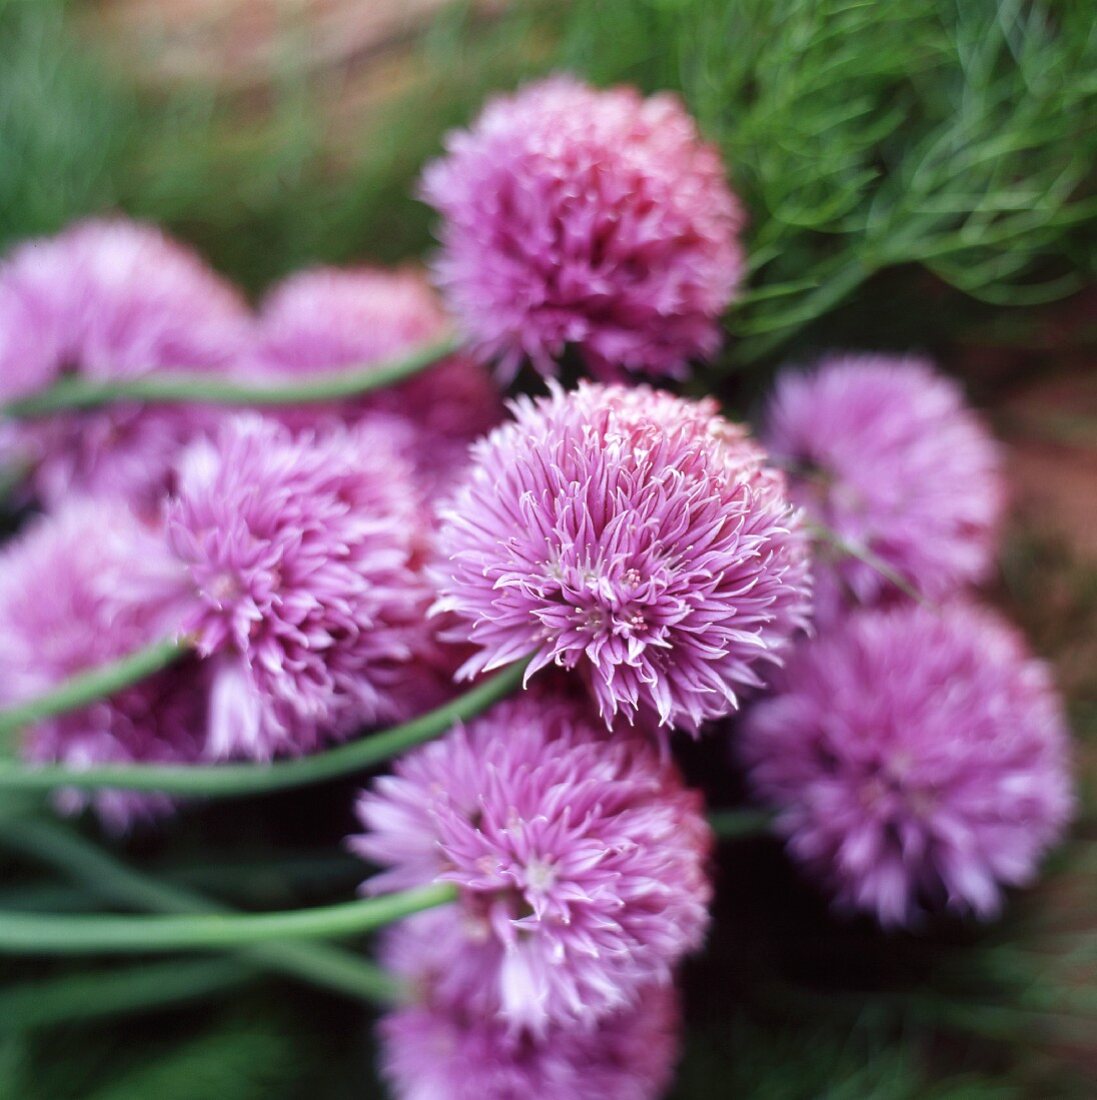 Chive flowers in a a garden (close-up)